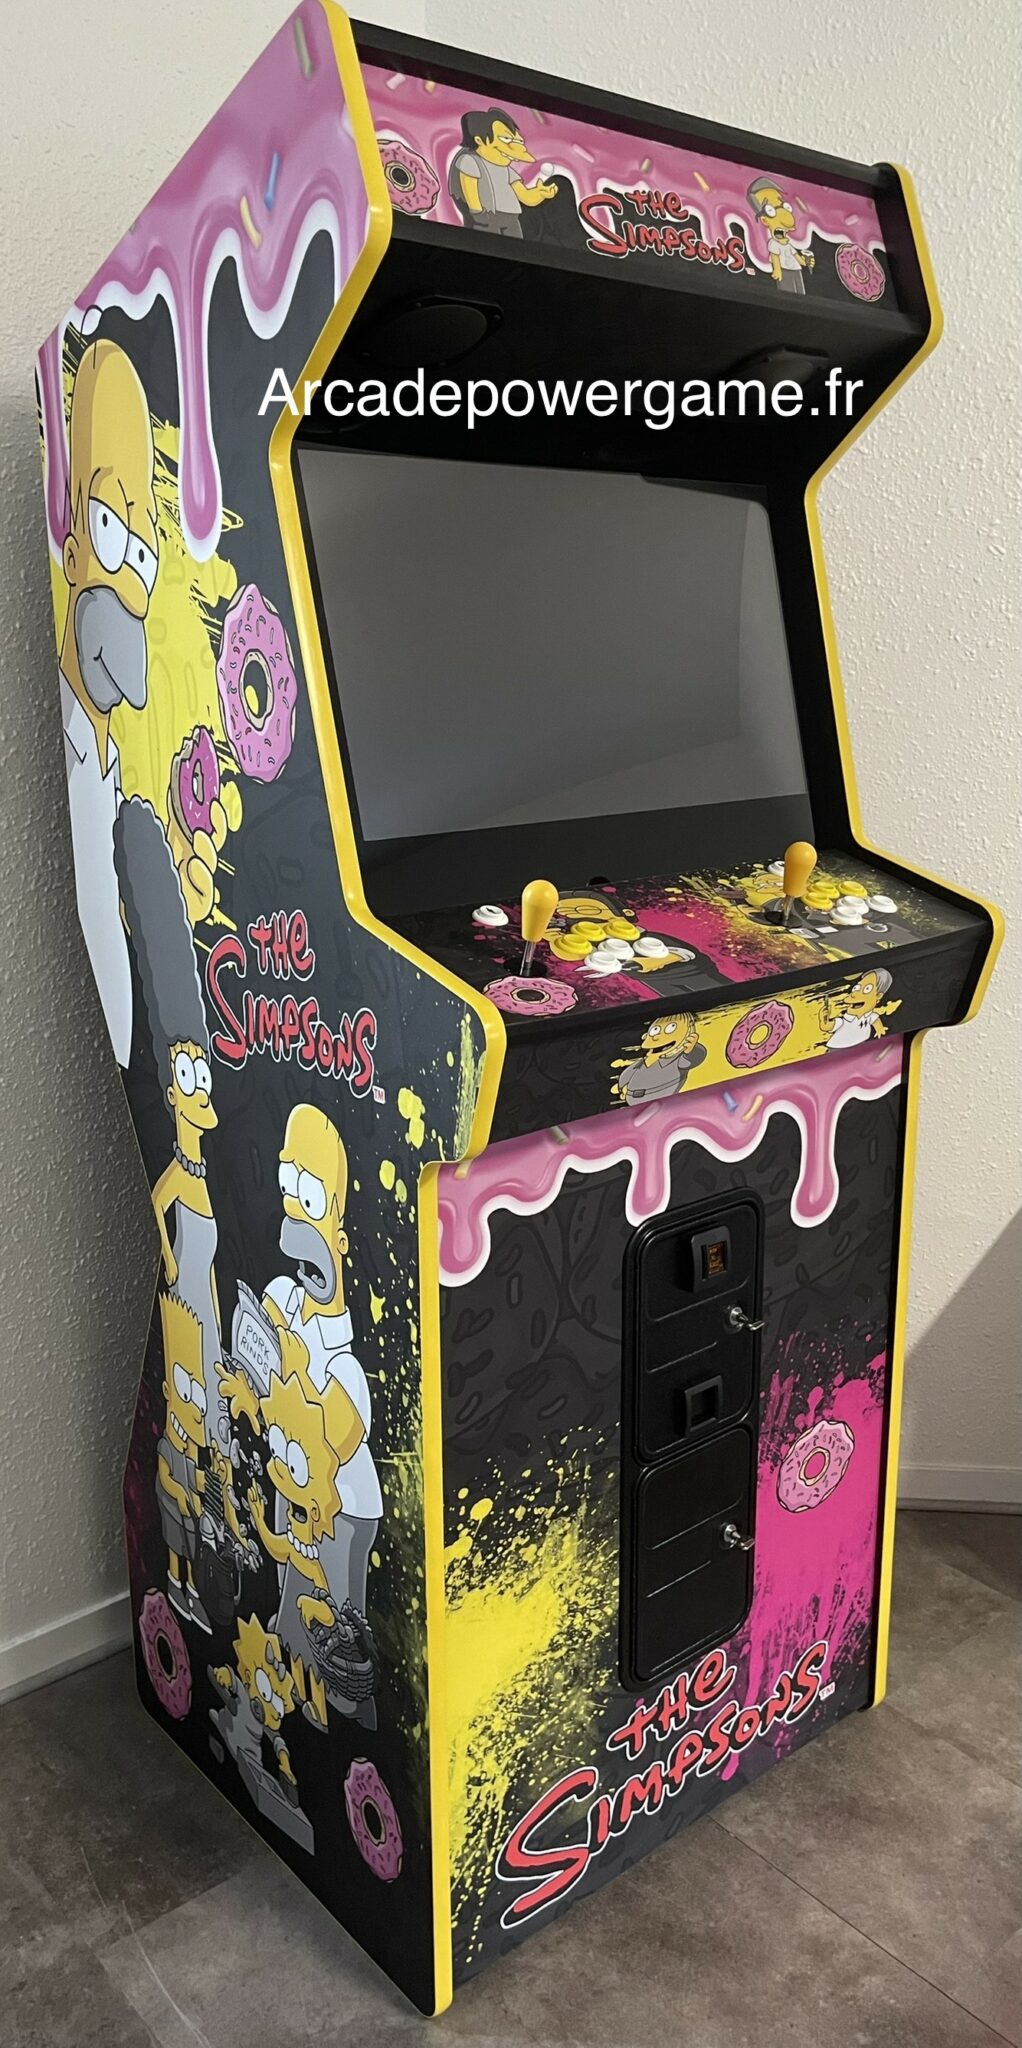 Borne-arcade-power-game-the-simpsons-scaled